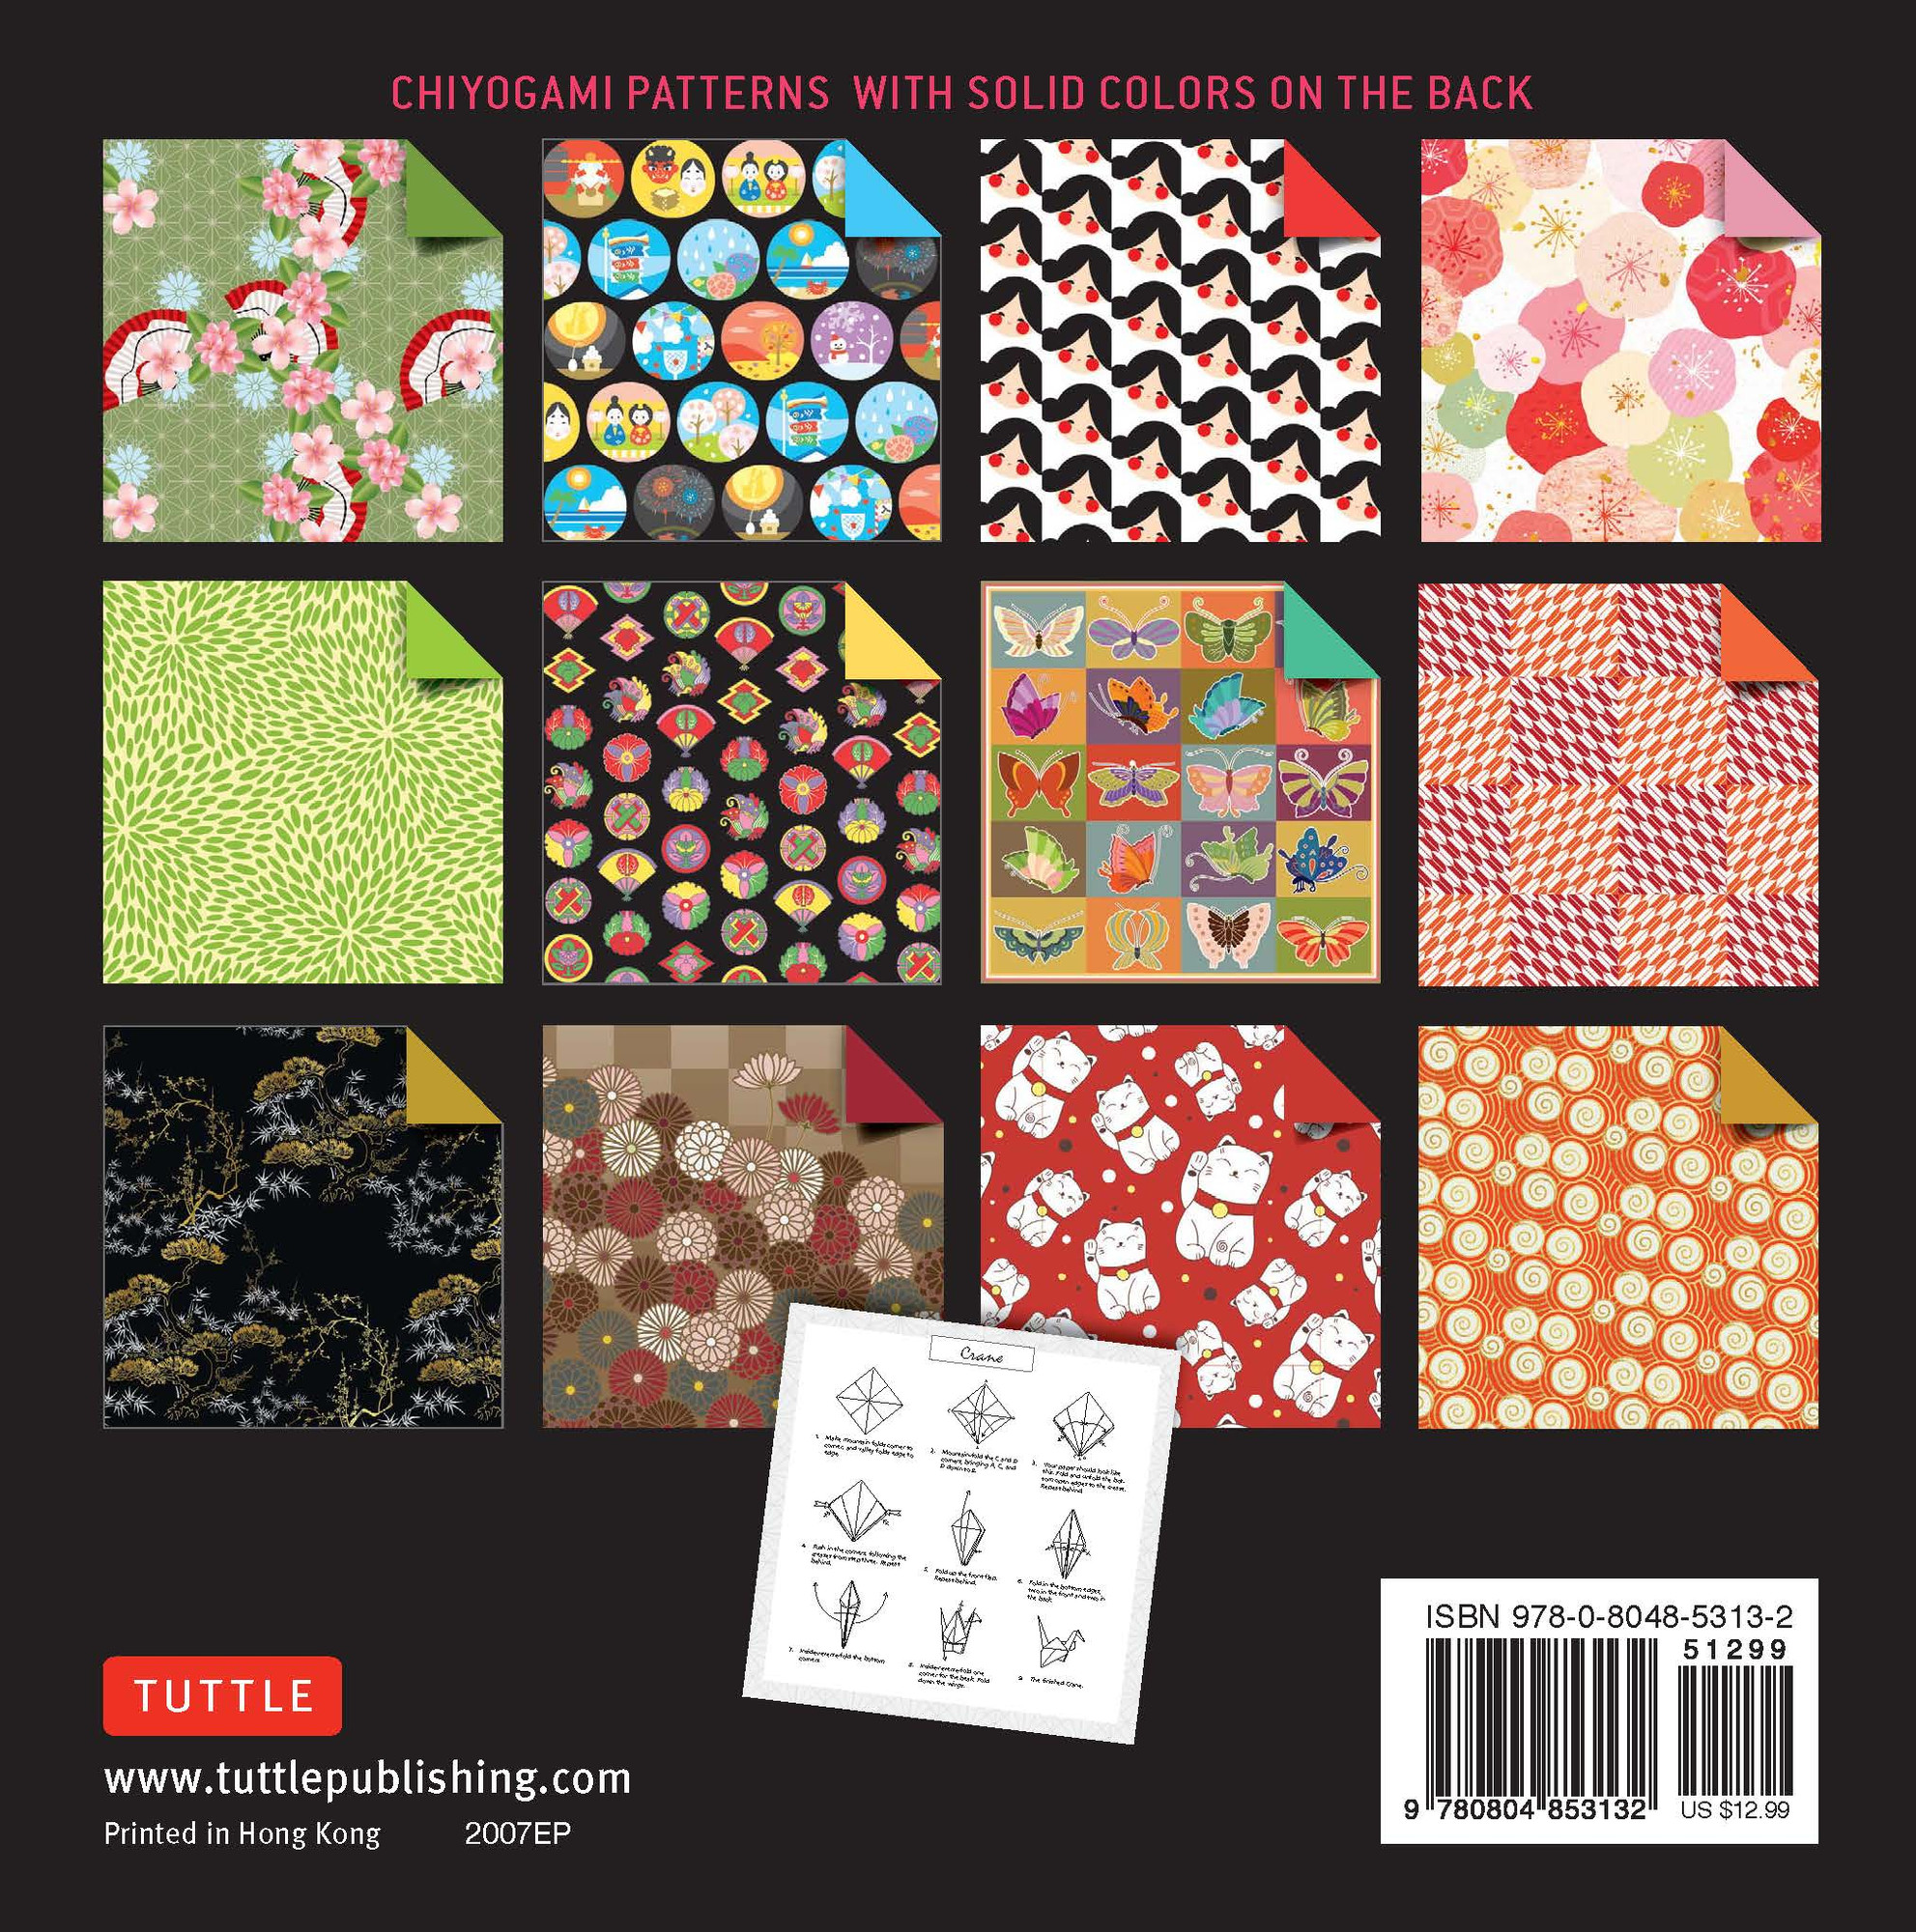 Japanese Print Chiyogami Origami Paper (6, 40 designs, 200 sheets